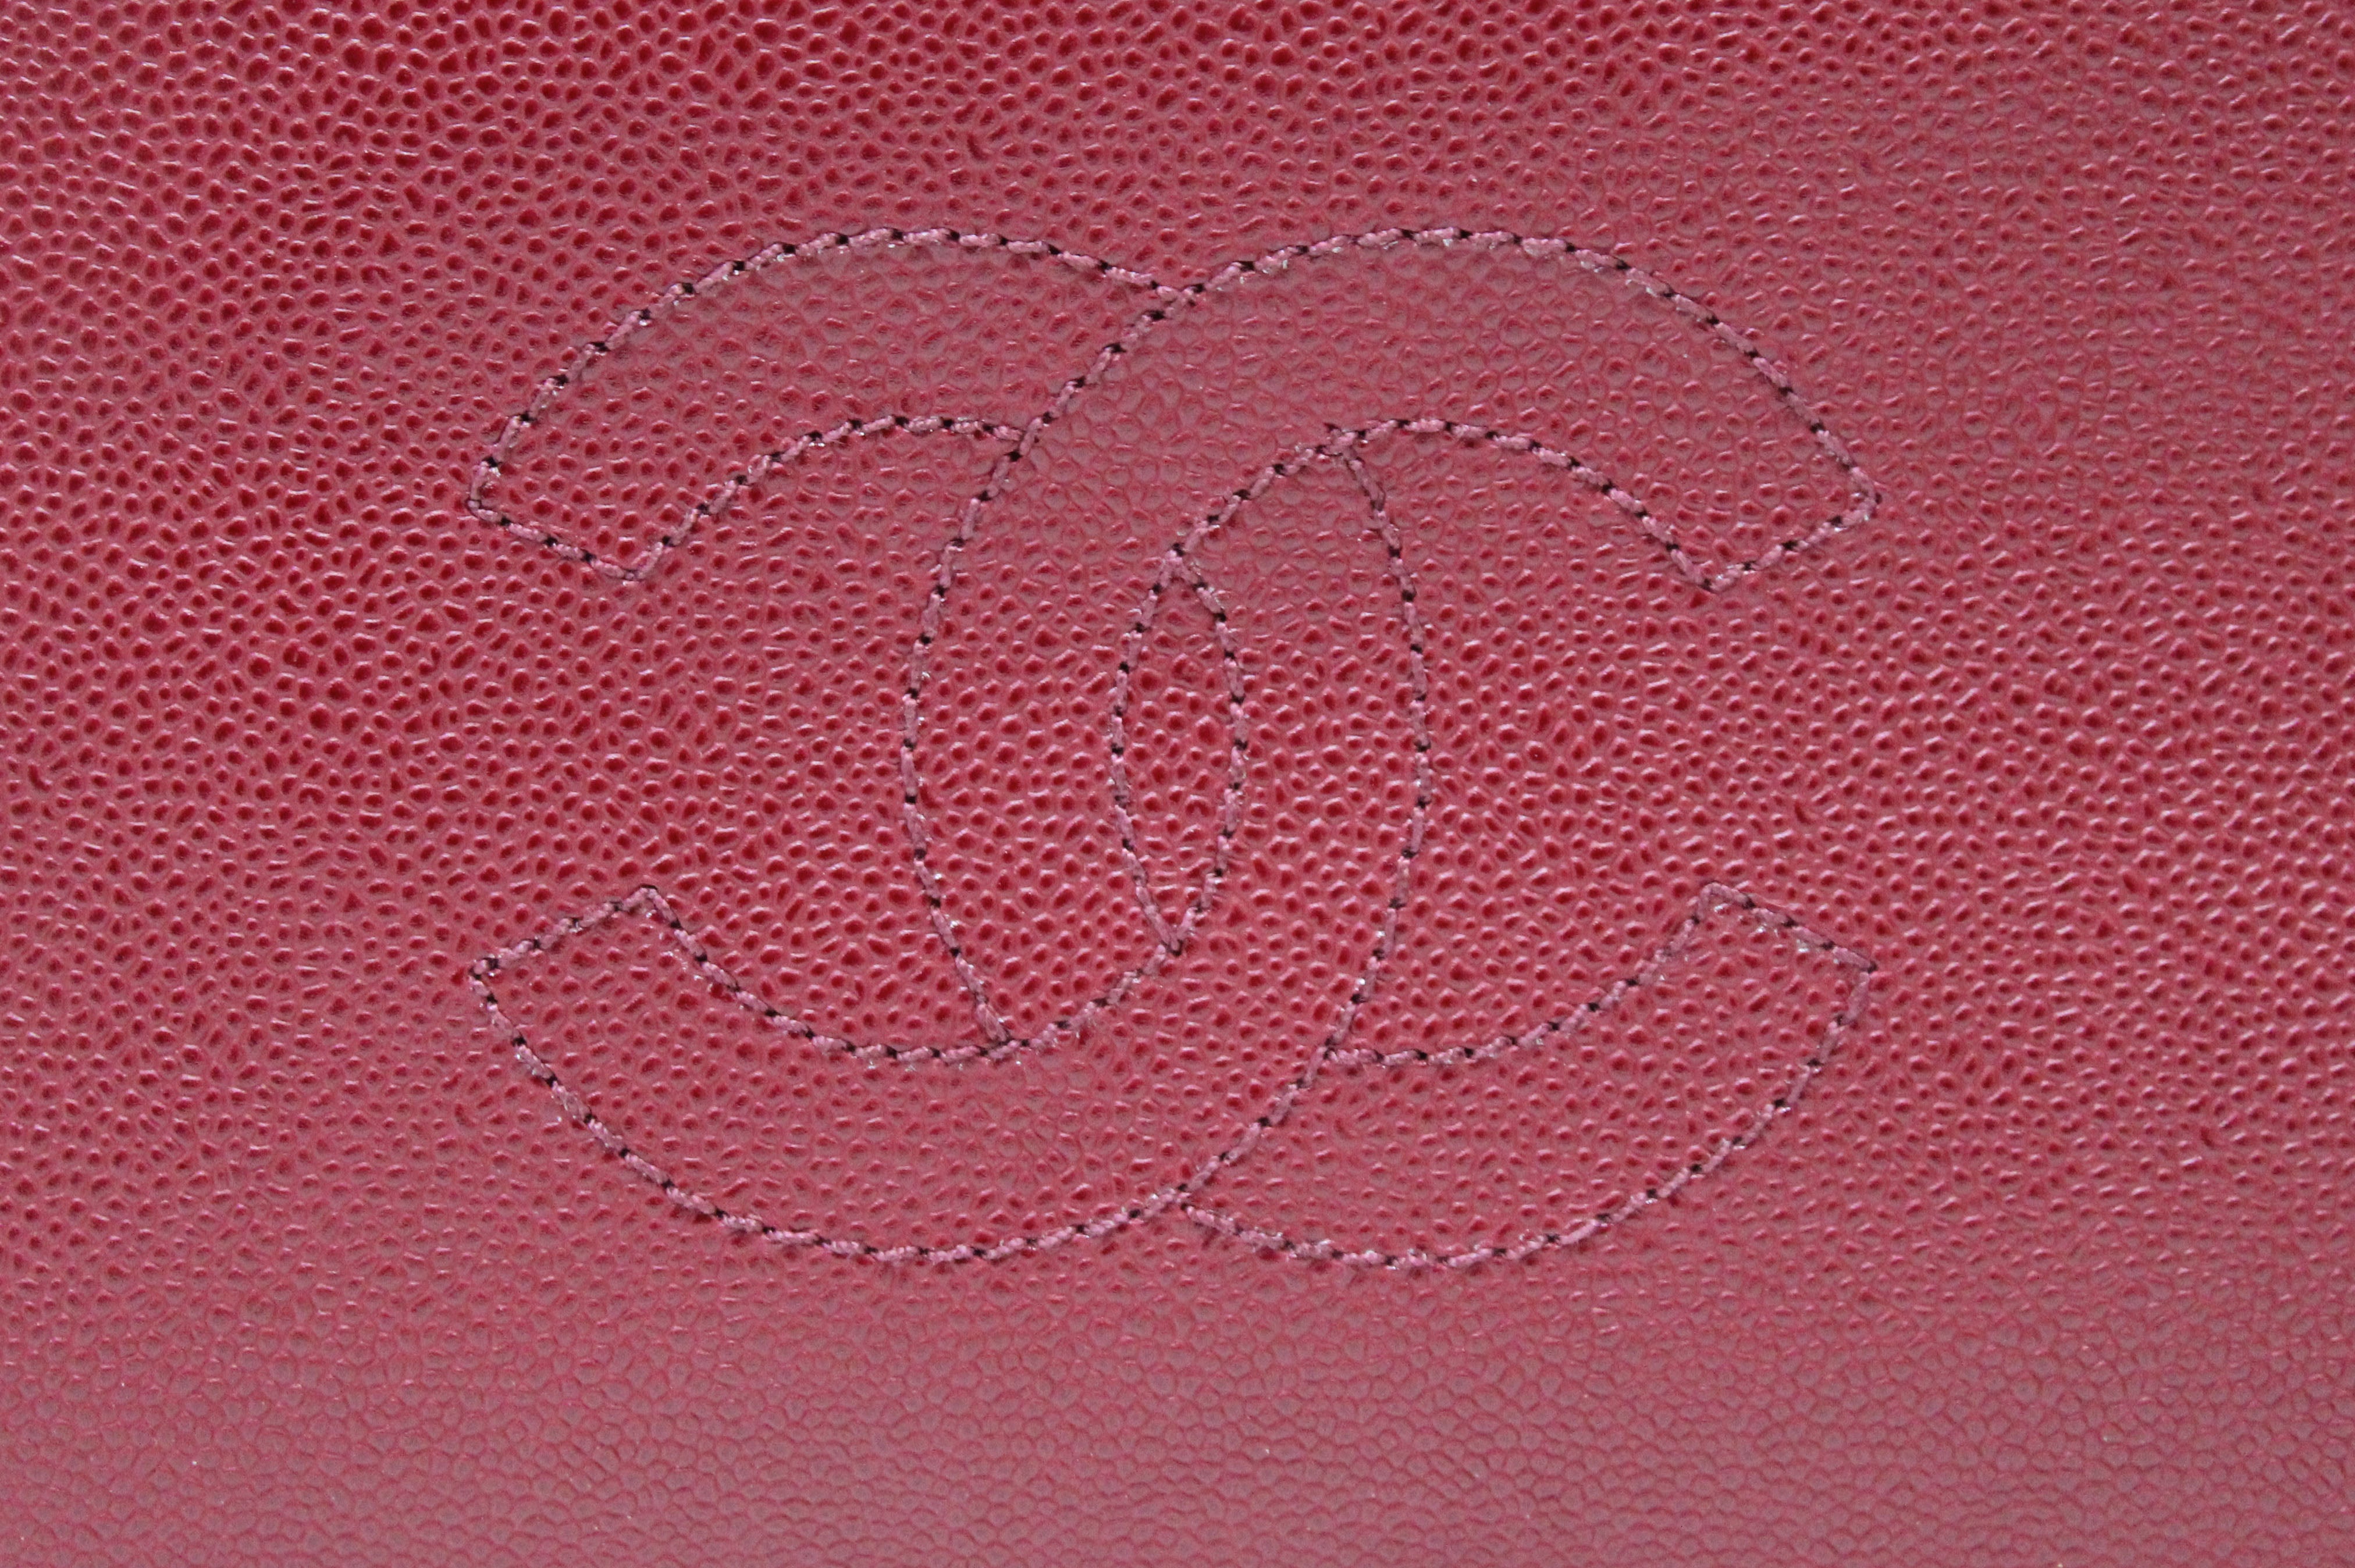 Authentic Chanel Vintage Deep Red Caviar Leather Small Tote Shoulder Bag